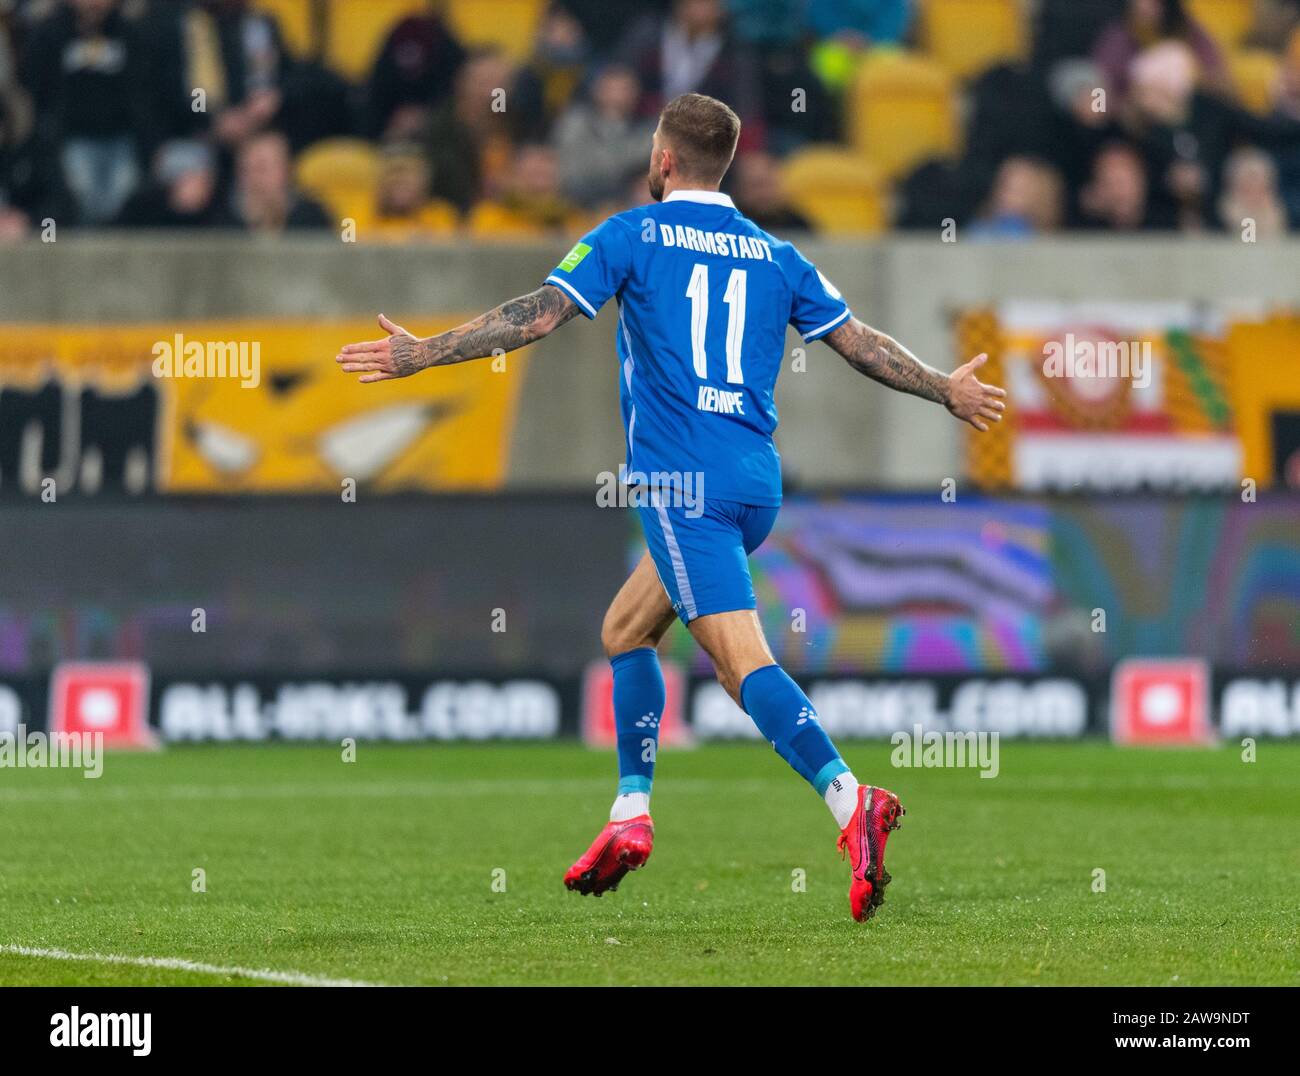 Dresden, Germany. 07th Feb, 2020. Football: 2nd Bundesliga, SG Dynamo Dresden - SV Darmstadt 98, 21st matchday, at the Rudolf Harbig Stadium. Darmstadt's Tobias Kempe cheers after his goal for the 1:2. Credit: Robert Michael/dpa-Zentralbild/dpa - IMPORTANT NOTE: In accordance with the regulations of the DFL Deutsche Fußball Liga and the DFB Deutscher Fußball-Bund, it is prohibited to exploit or have exploited in the stadium and/or from the game taken photographs in the form of sequence images and/or video-like photo series./dpa/Alamy Live News Stock Photo